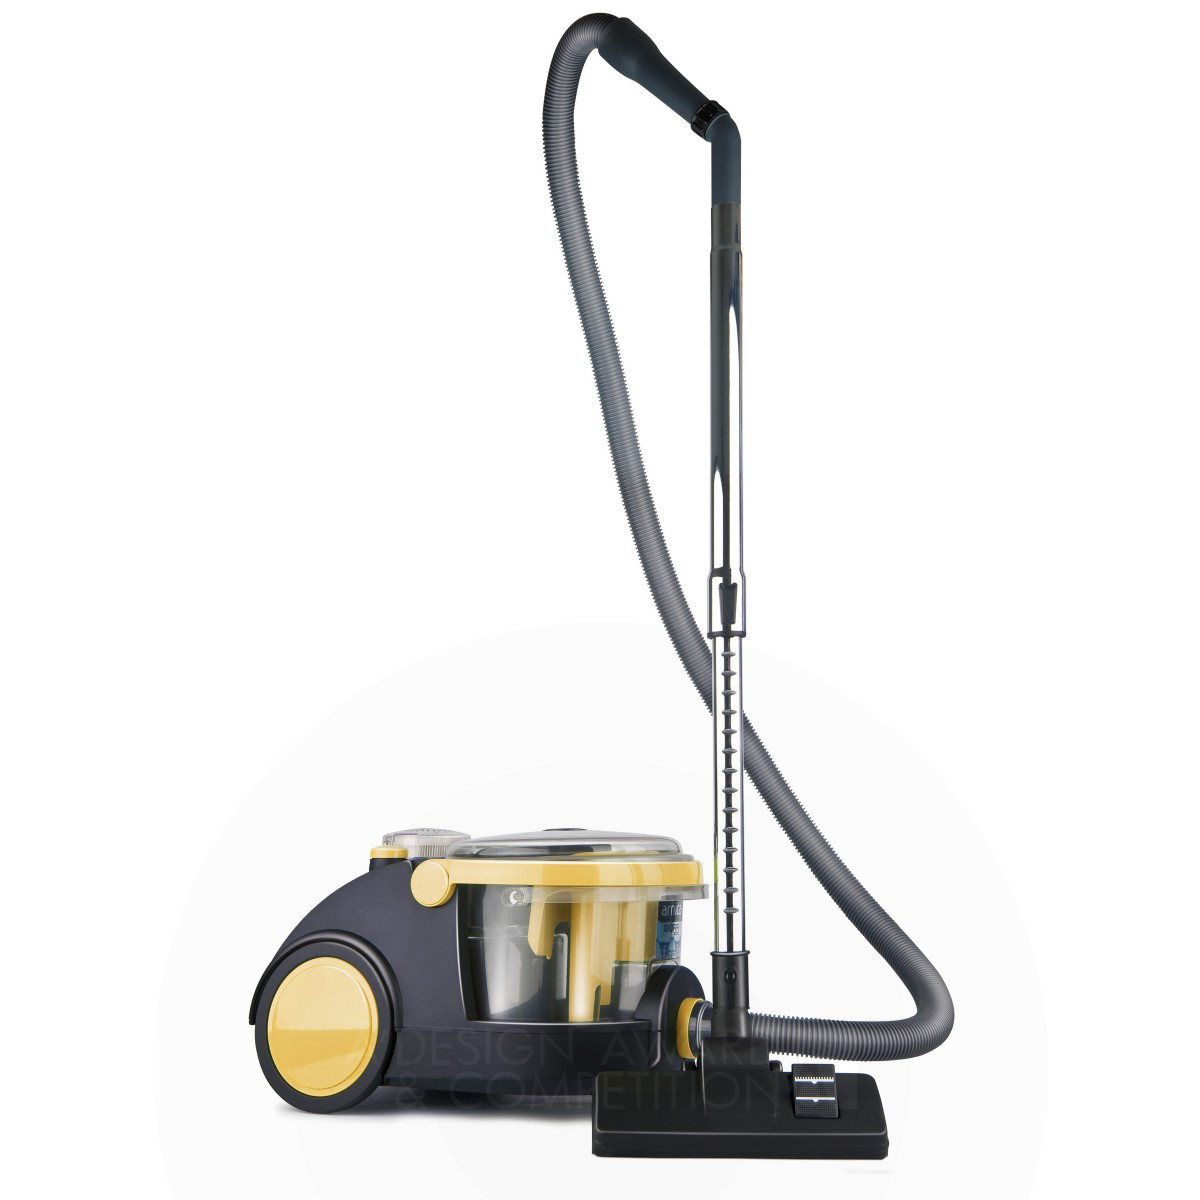 Arnica Bora vacuum cleaner with water filter by Yasemin Ulukan